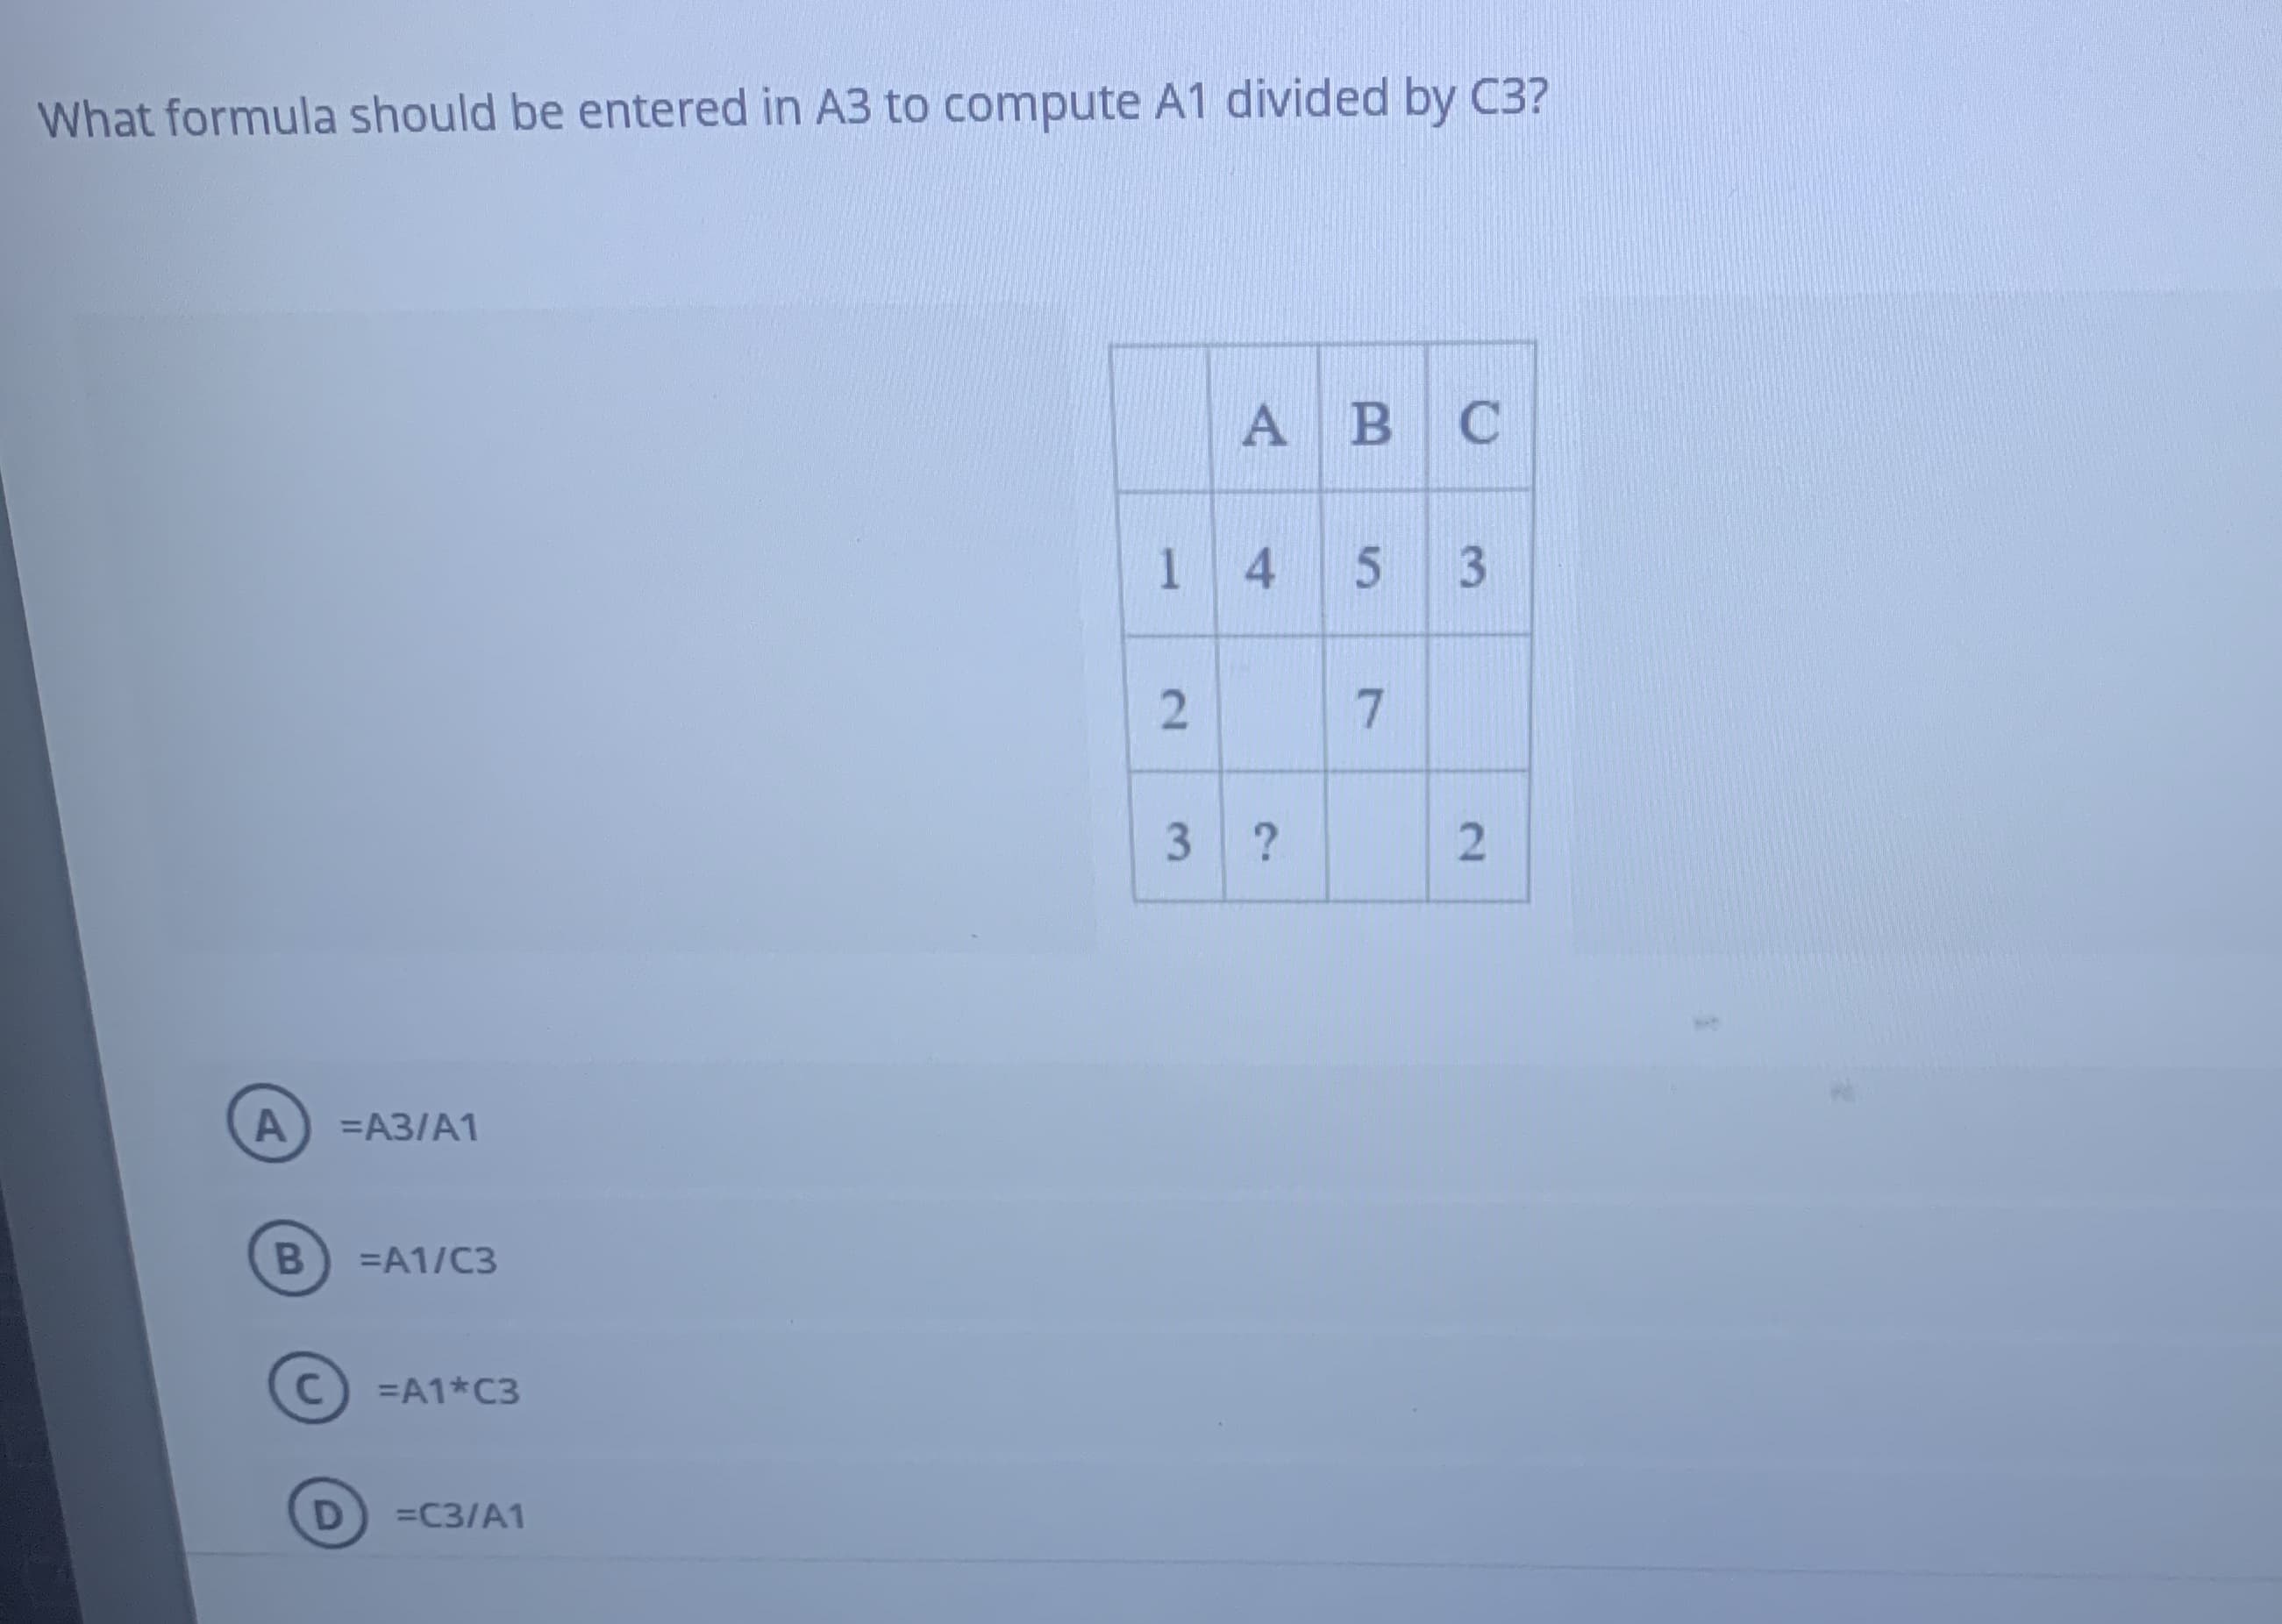 What formula should be entered in A3 to compute A1 divided by C3?
A B C
145 3
3 ?
A
=A3/A1
=A1/C3
=A1*C3
=C3/A1
2.
B
